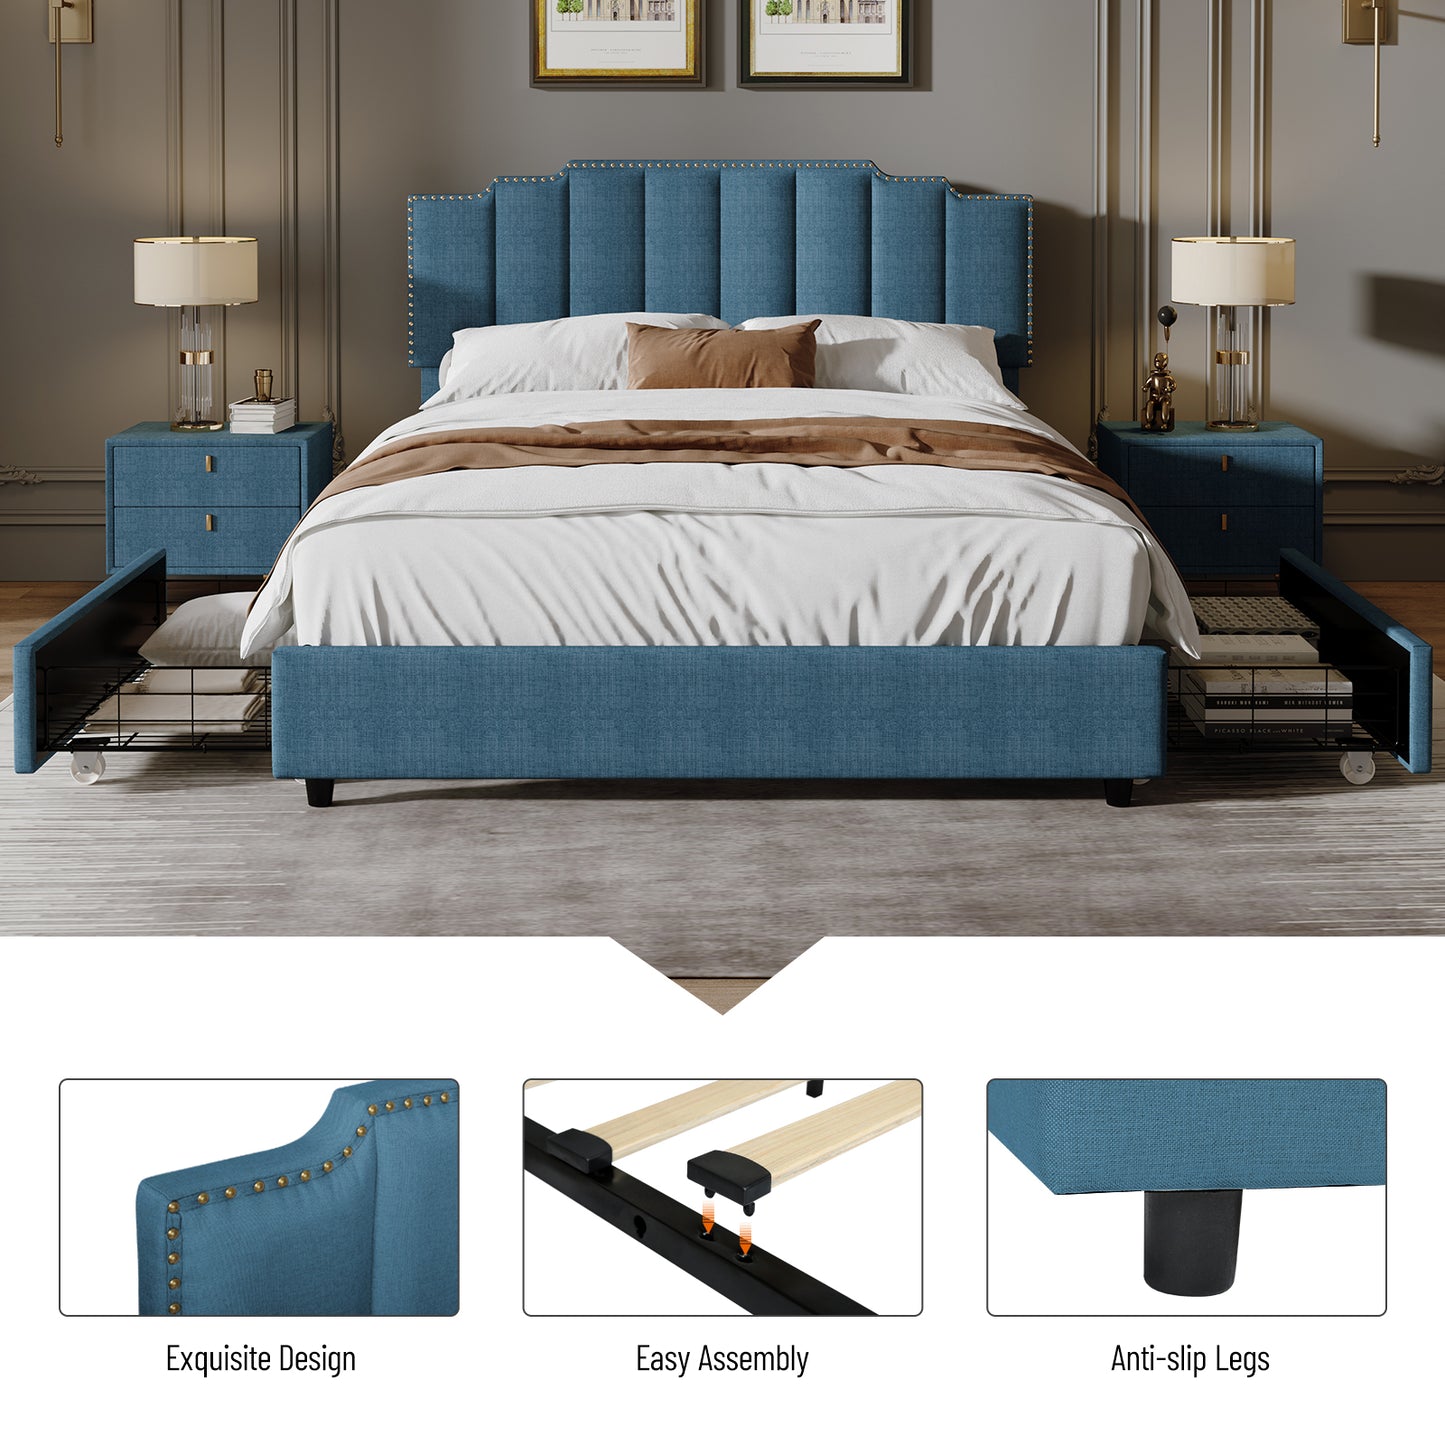 Queen Size Upholstered Platform Bed Linen Bed Frame with 2 Drawers Stitched Padded Headboard with Rivets Design Strong Bed Slats System No Box Spring Needed Blue